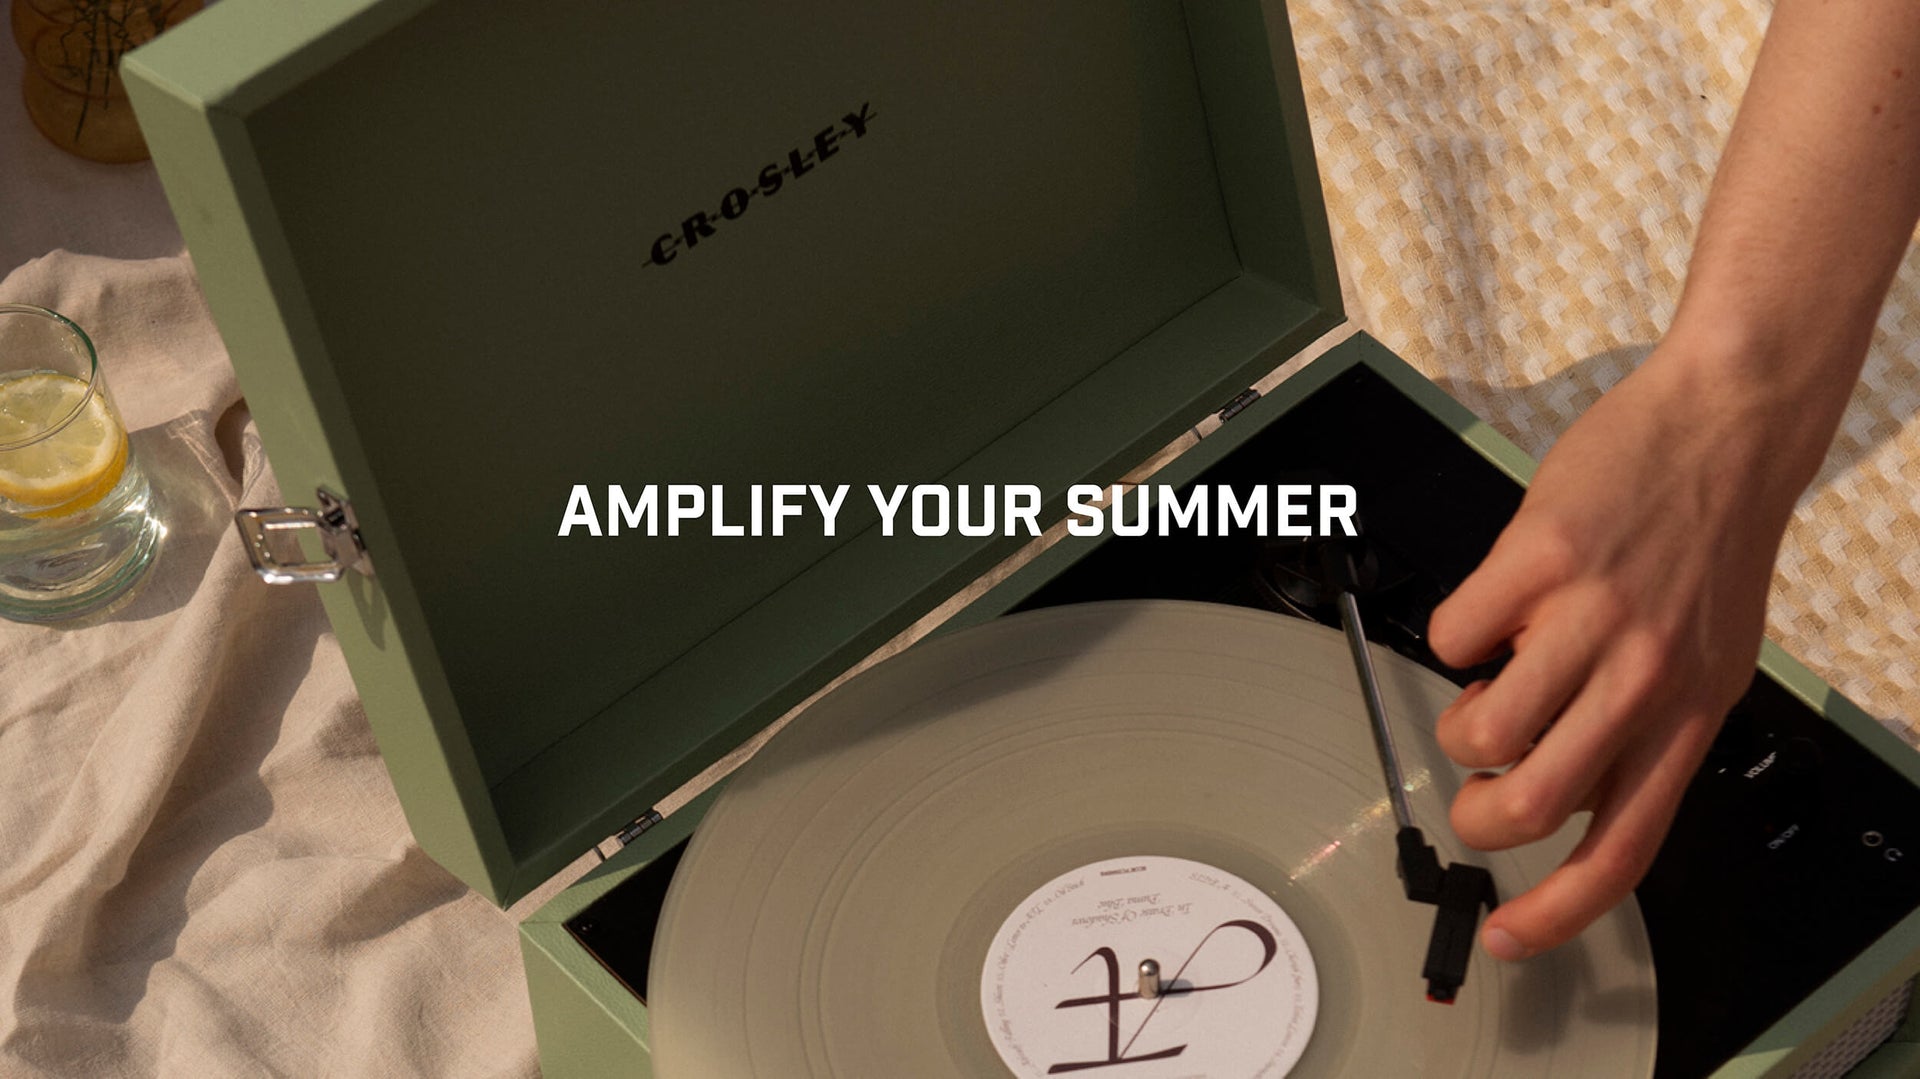 New Voyager colors | Amplify your Summer Crosley Radio Europe